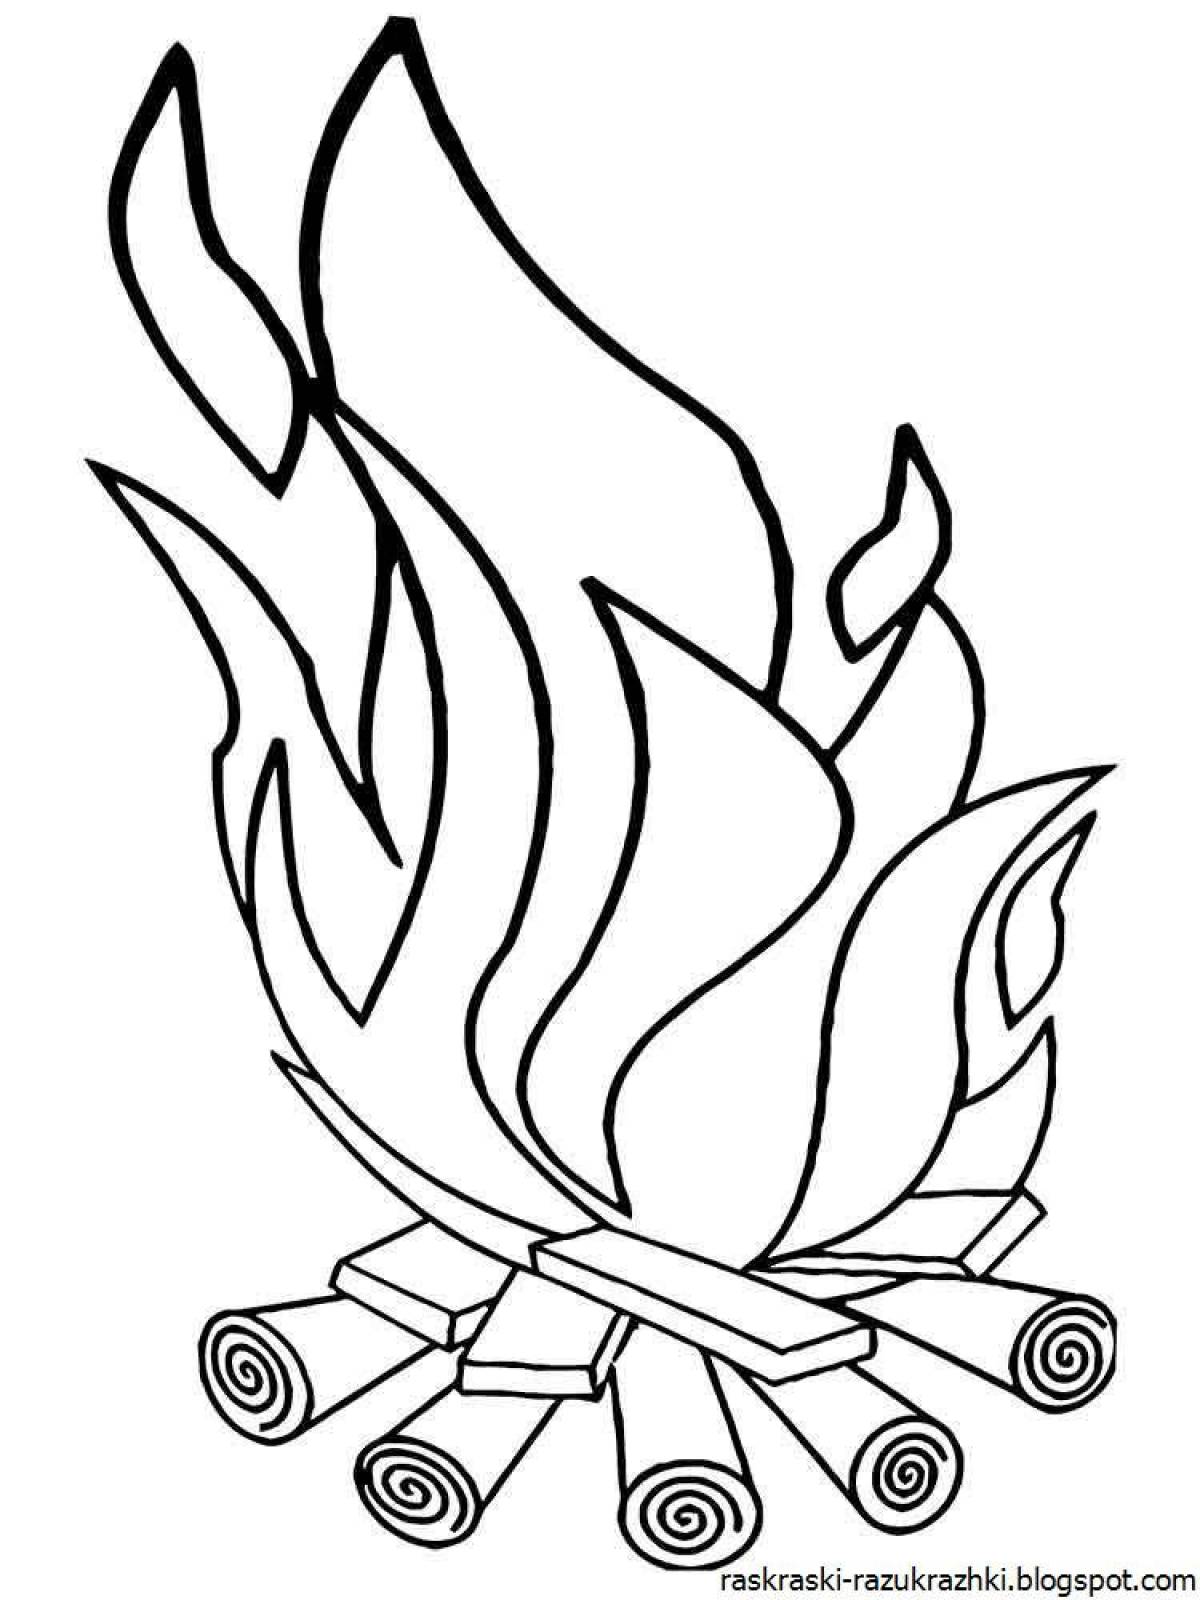 Exciting fire coloring for kids